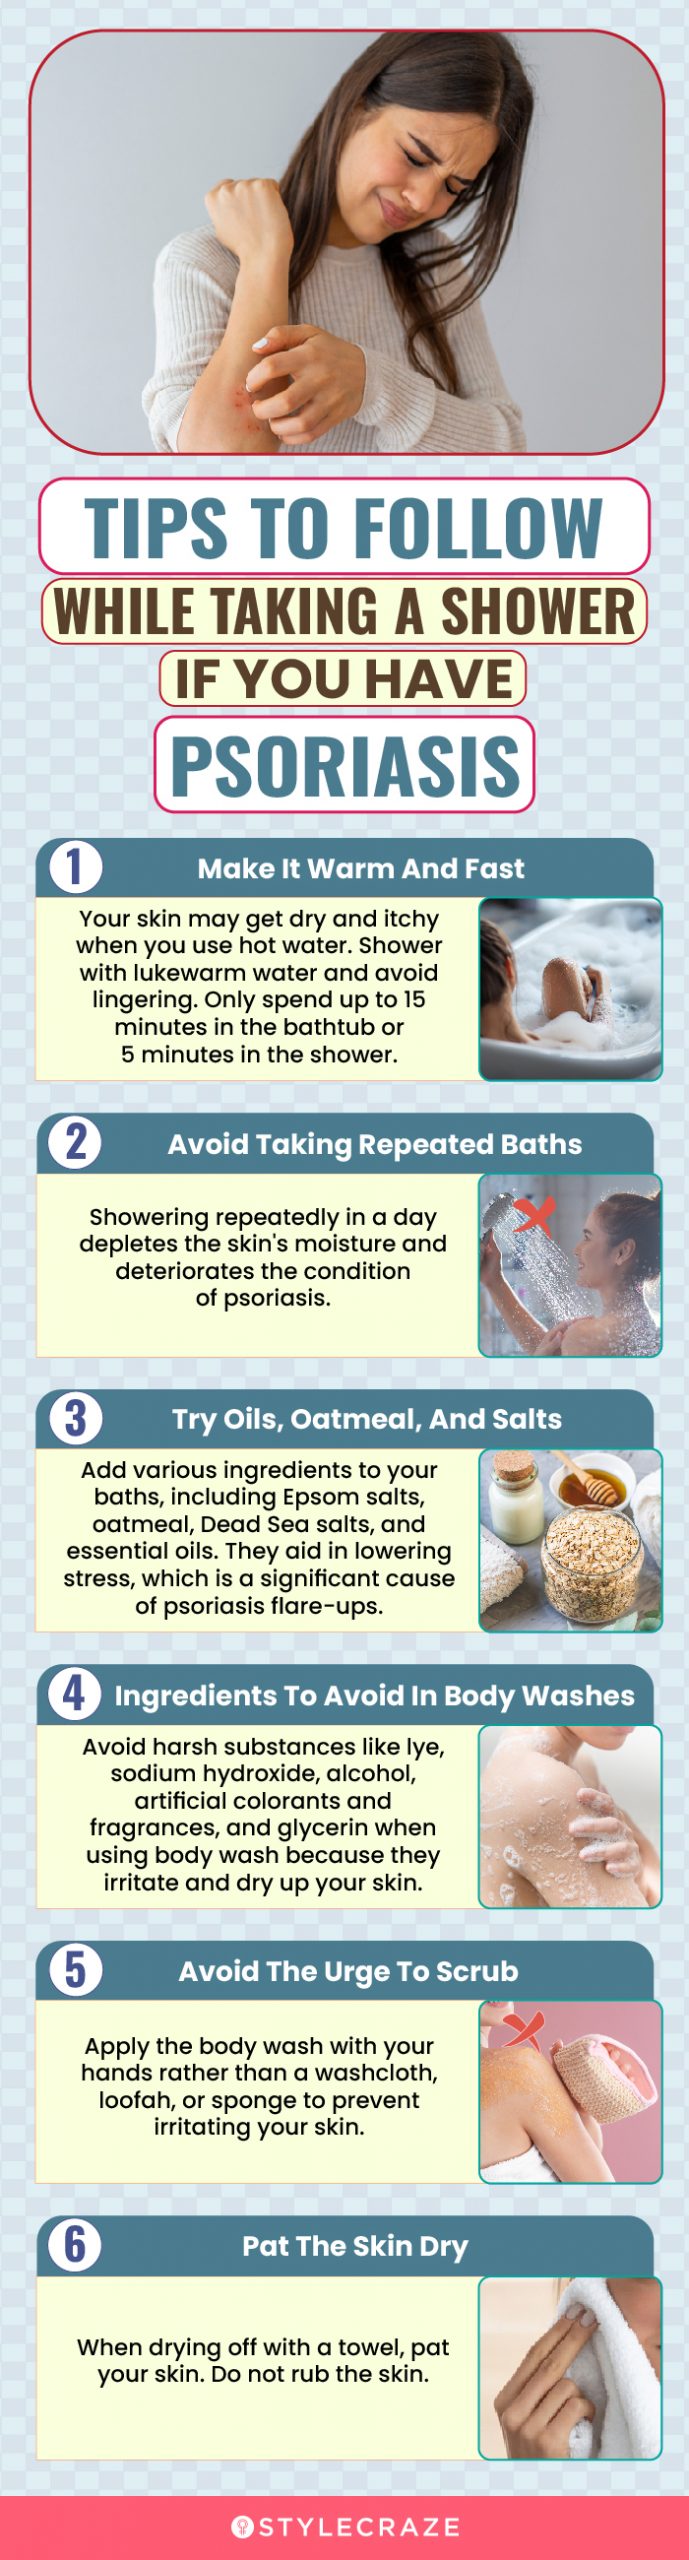 Tips To Follow While Taking A Shower If You Have Psoriasis (infographic)